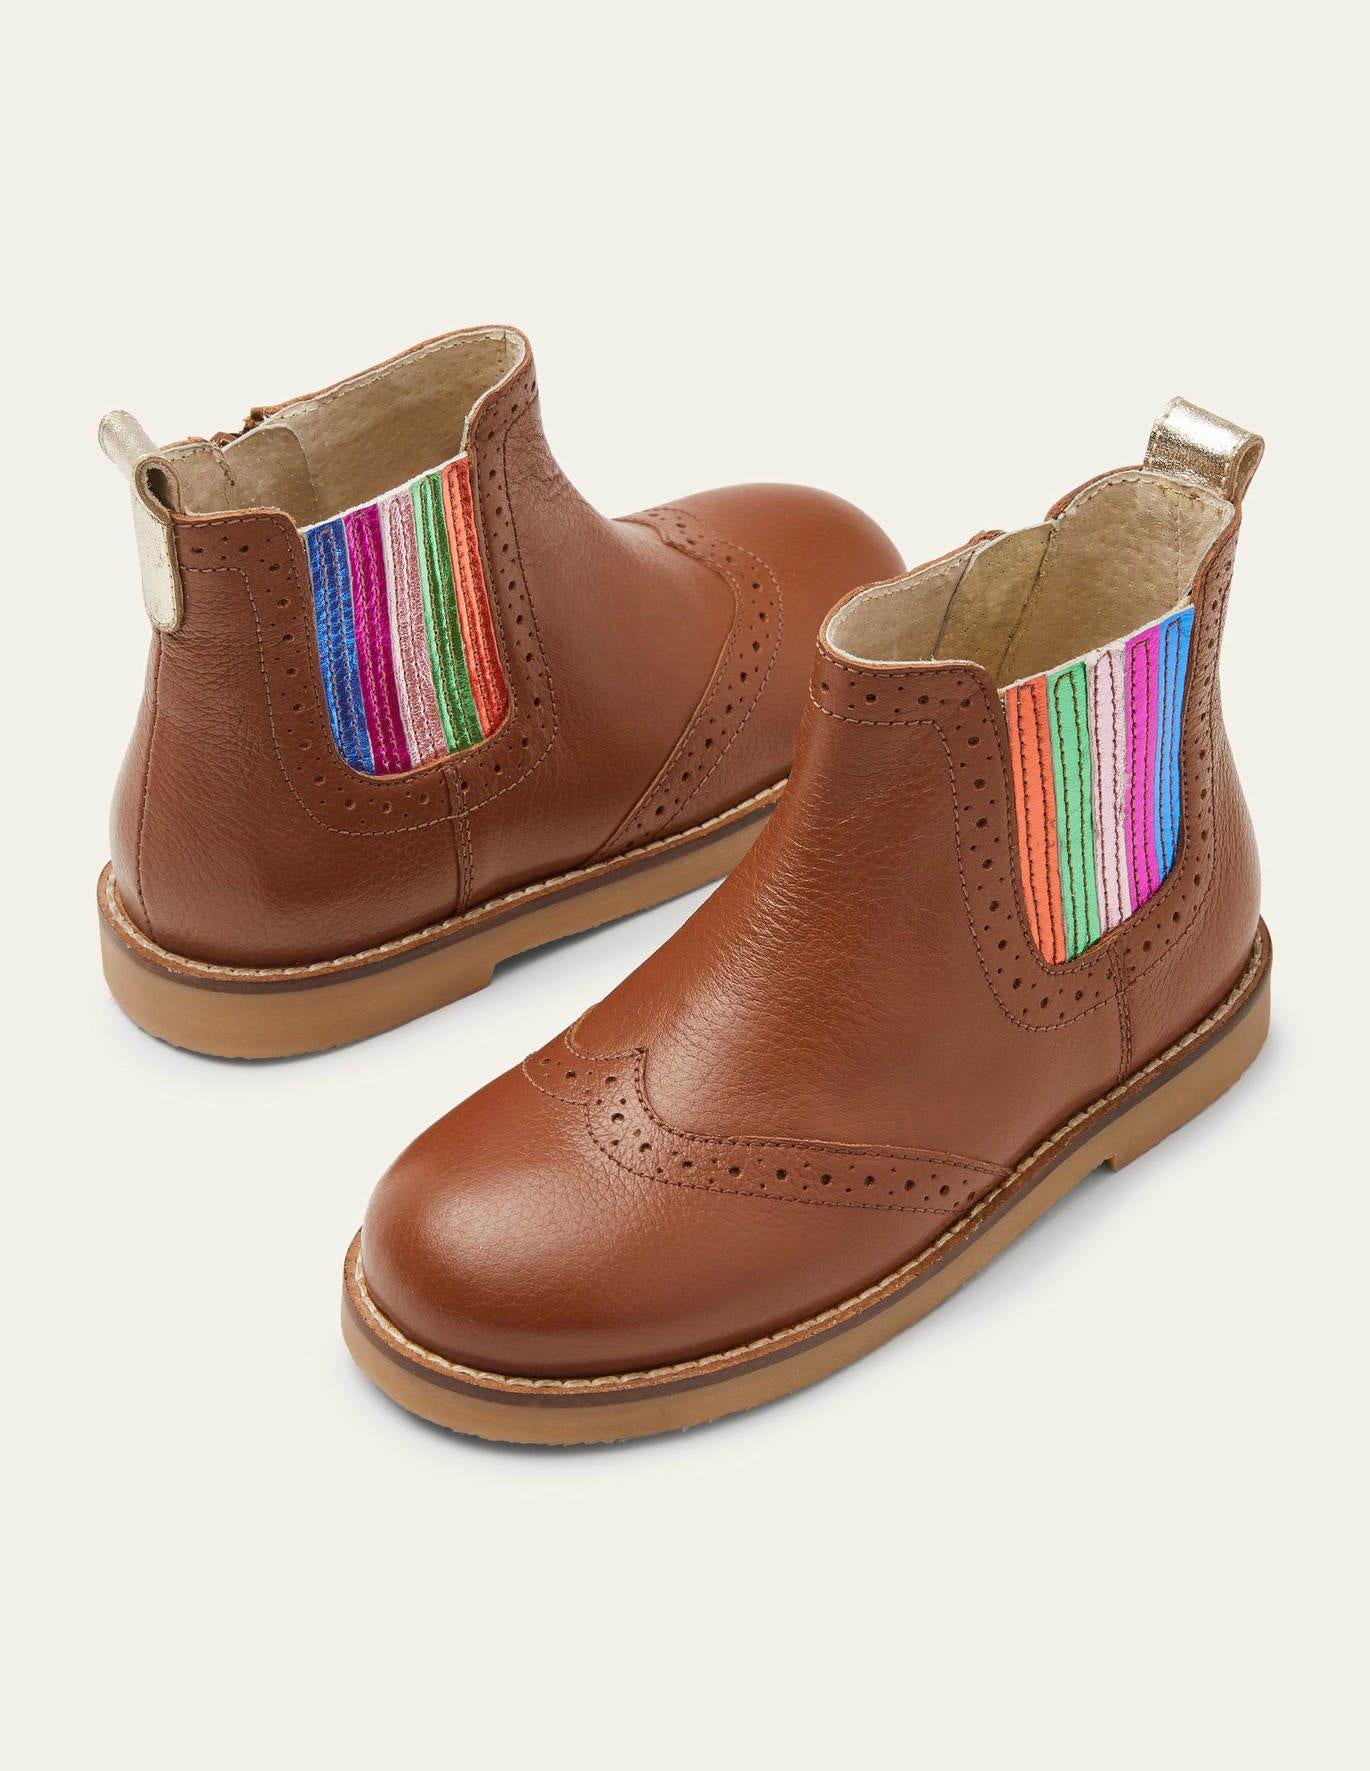 Intensive grandmother cigar Boden Leather Chelsea Boots Tan Rainbow , Tan Rainbow in Pink | Lyst